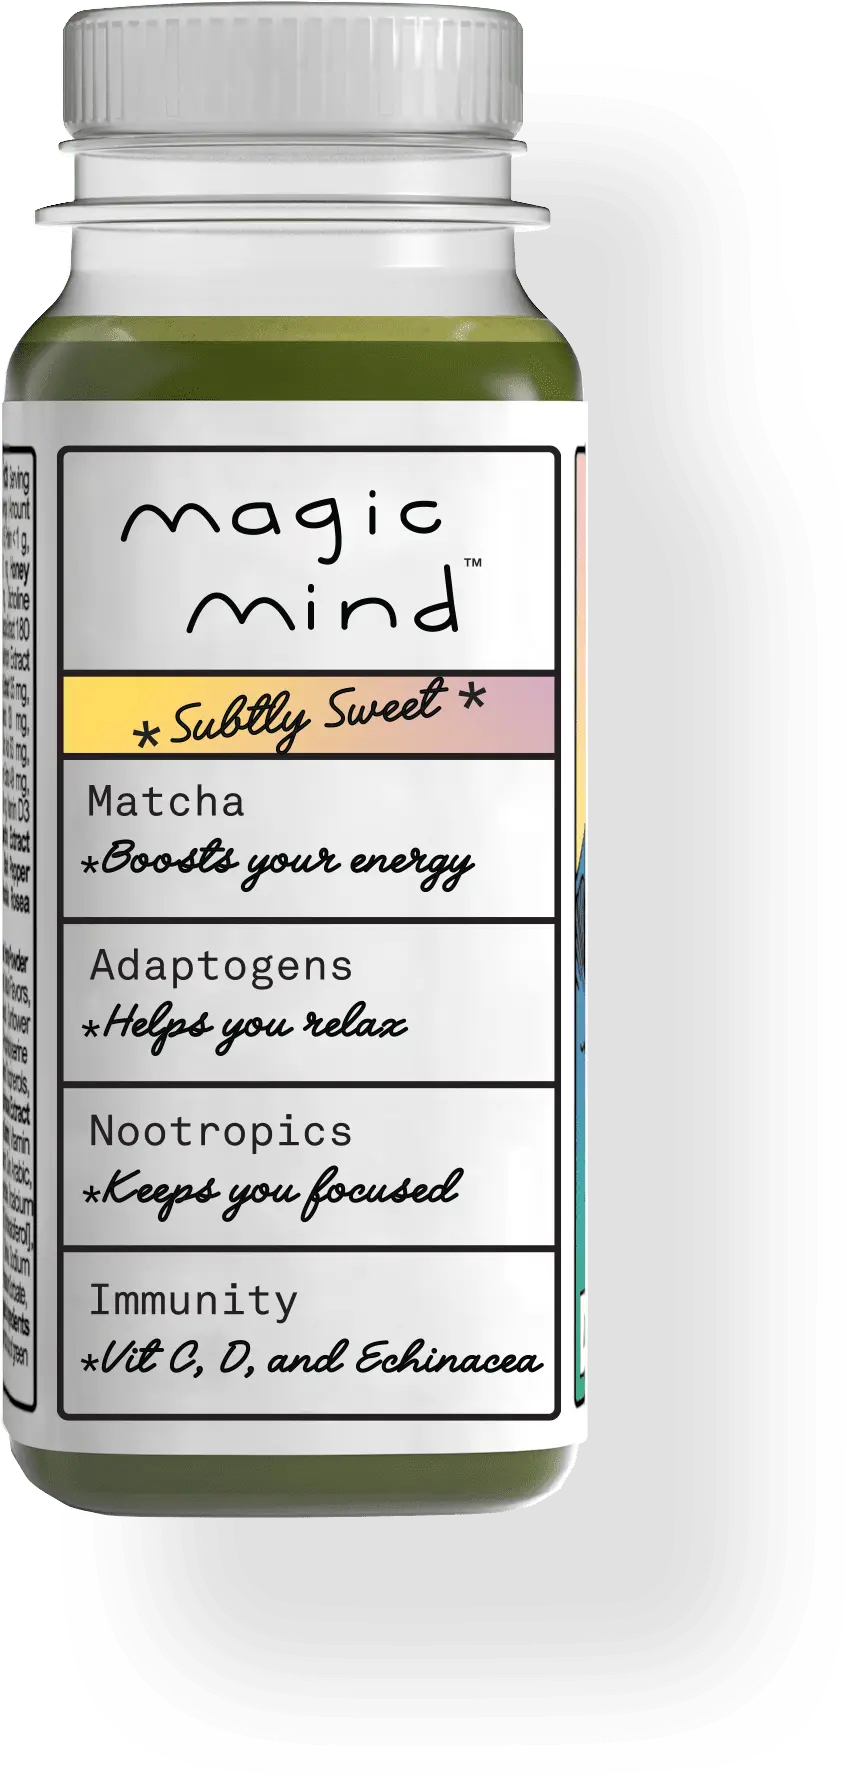 bottle of magic mind that shows benefits